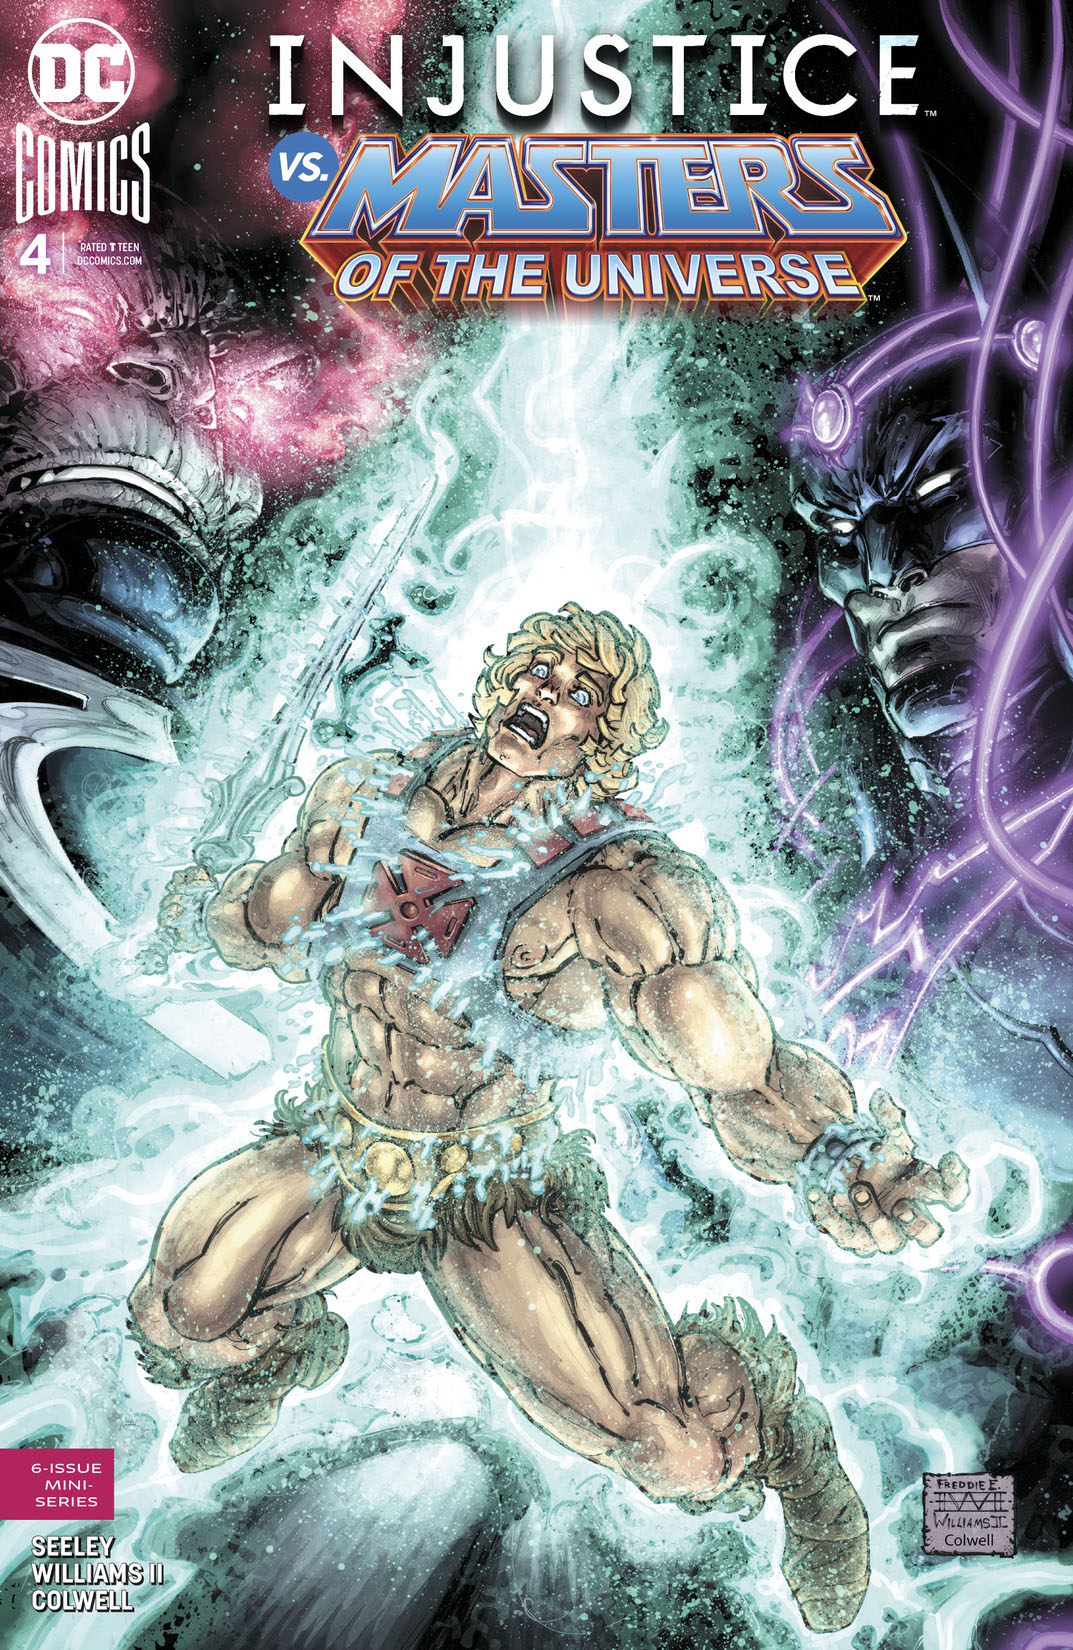 Injustice Vs. Masters of the Universe #4 preview images